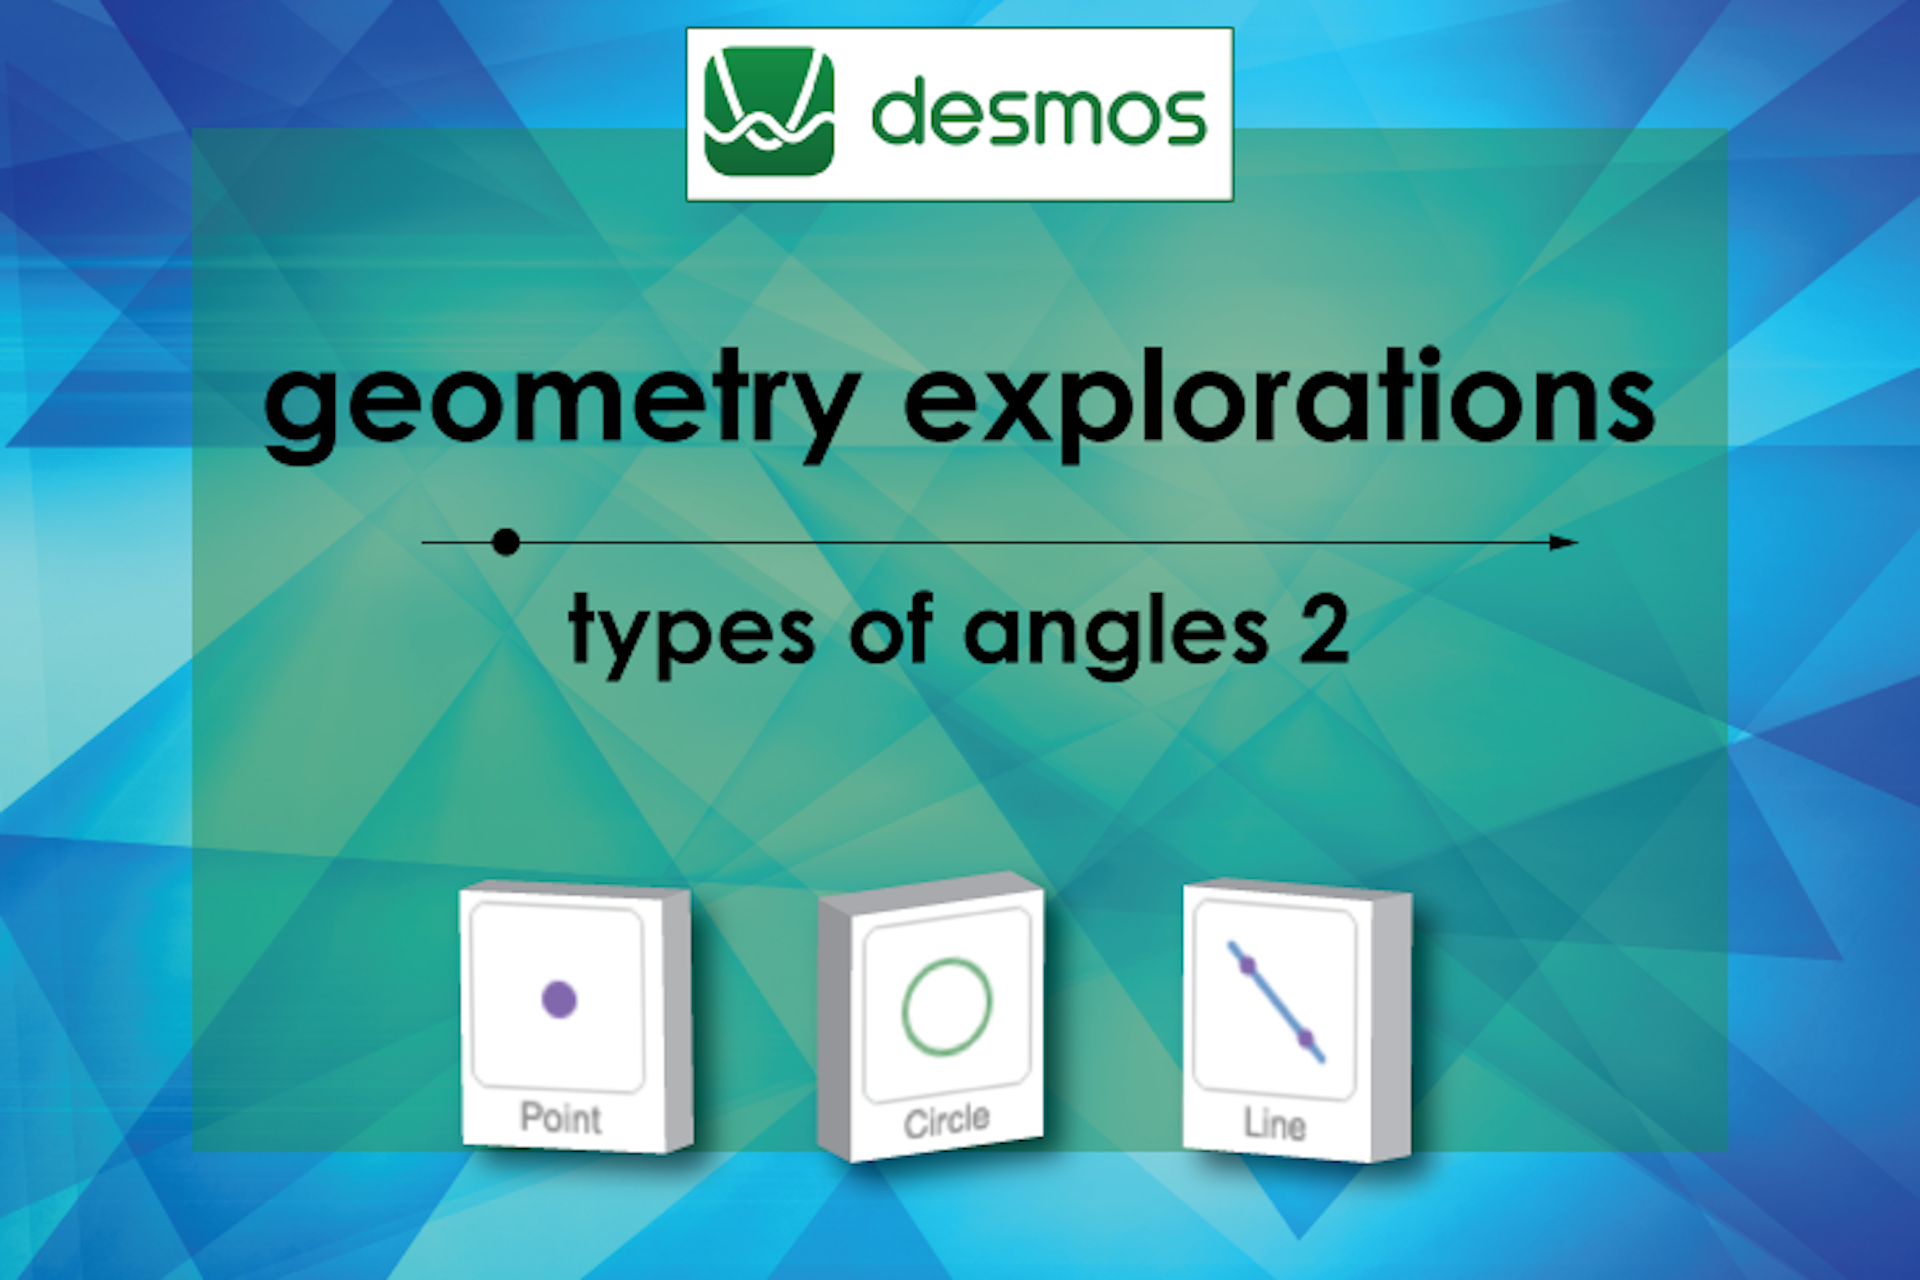 Closed Captioned Video: Desmos Geometry Exploration: Types of Angles II